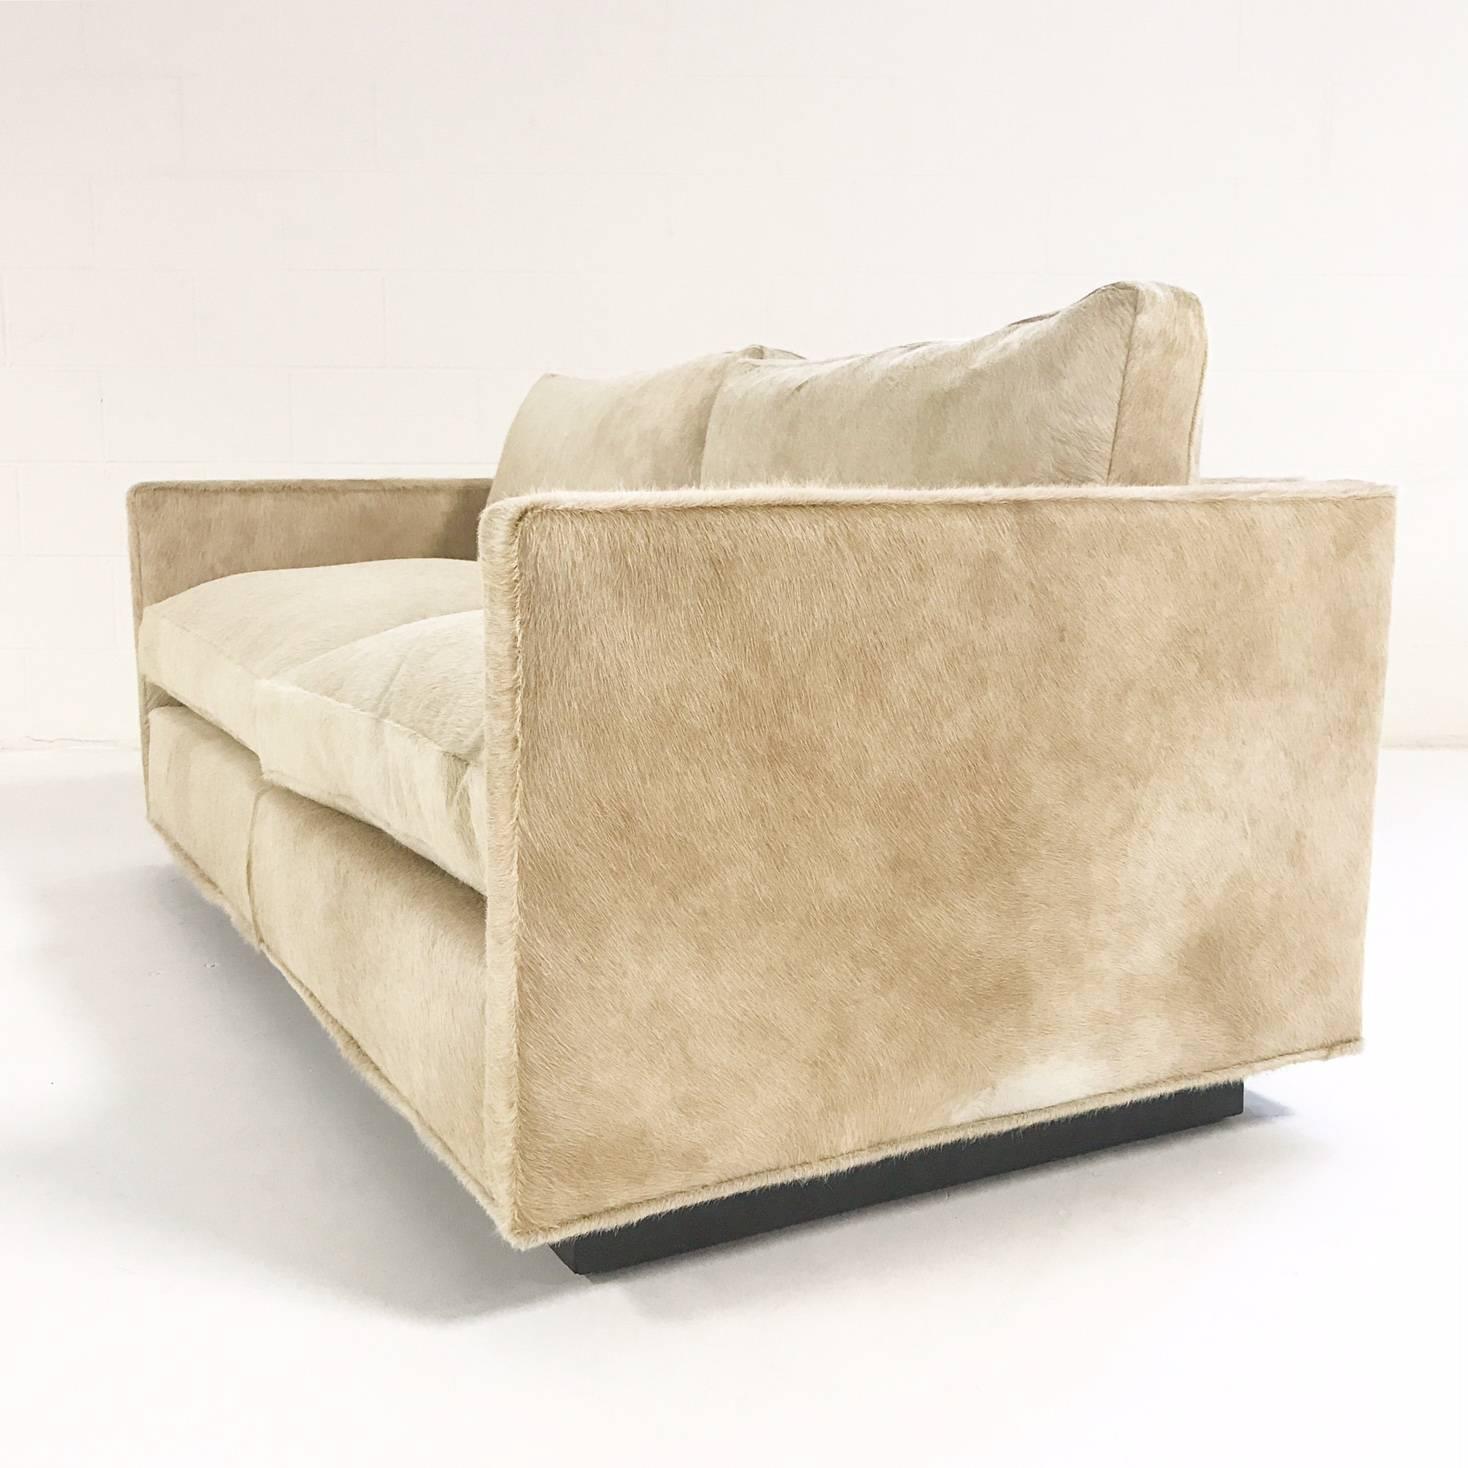 One of a kind Milo Baughman for Thayer Coggin loveseat restored in Brazilian cowhide

The lines, so simple. 
The cushions, so squishy.
Brought back to life,
This loveseat, so dishy.

Paramount to Baughman's design philosophy was that Good